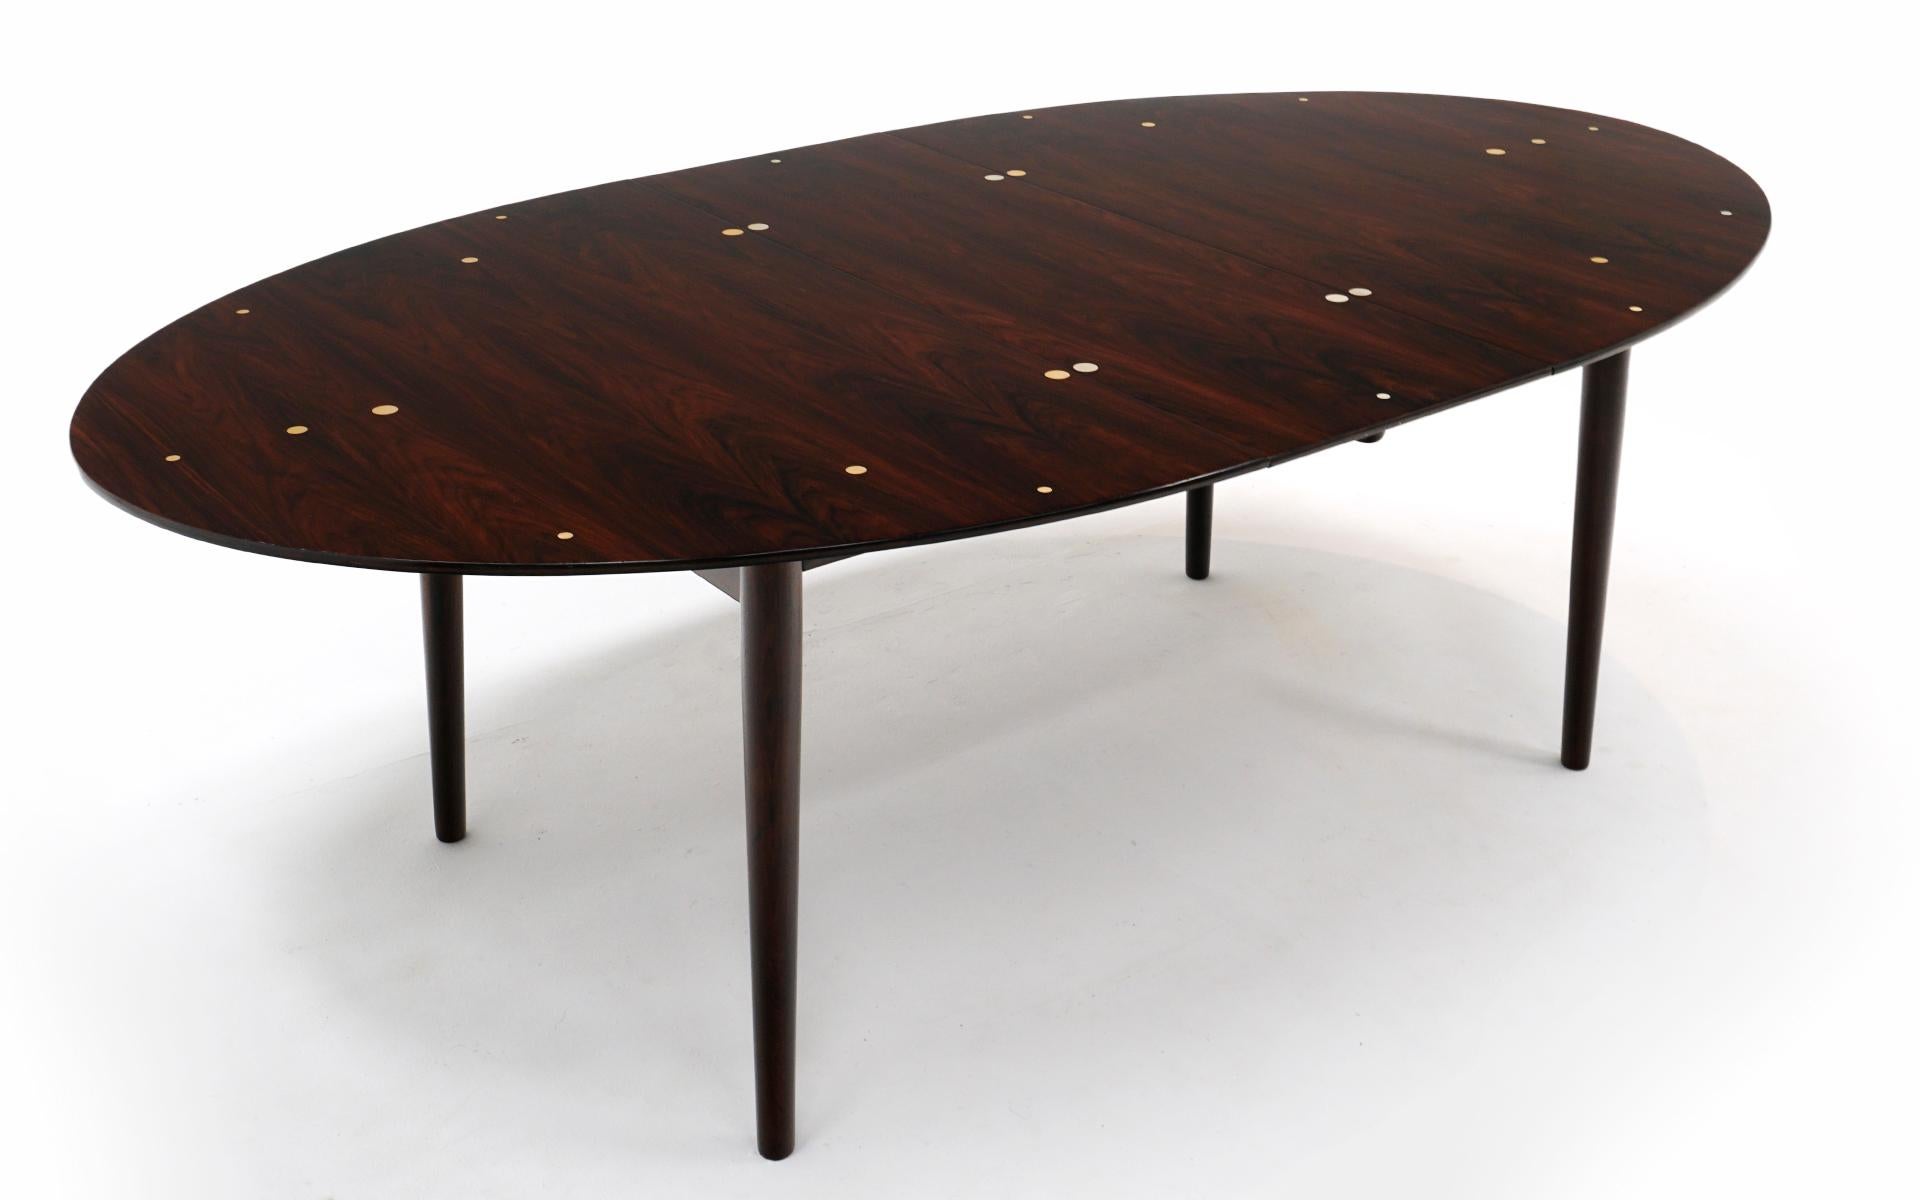 Finn Juhl Judas Dining Table for Niels Vodder, Brazilian Rosewood, Silver Inlay In Good Condition For Sale In Kansas City, MO